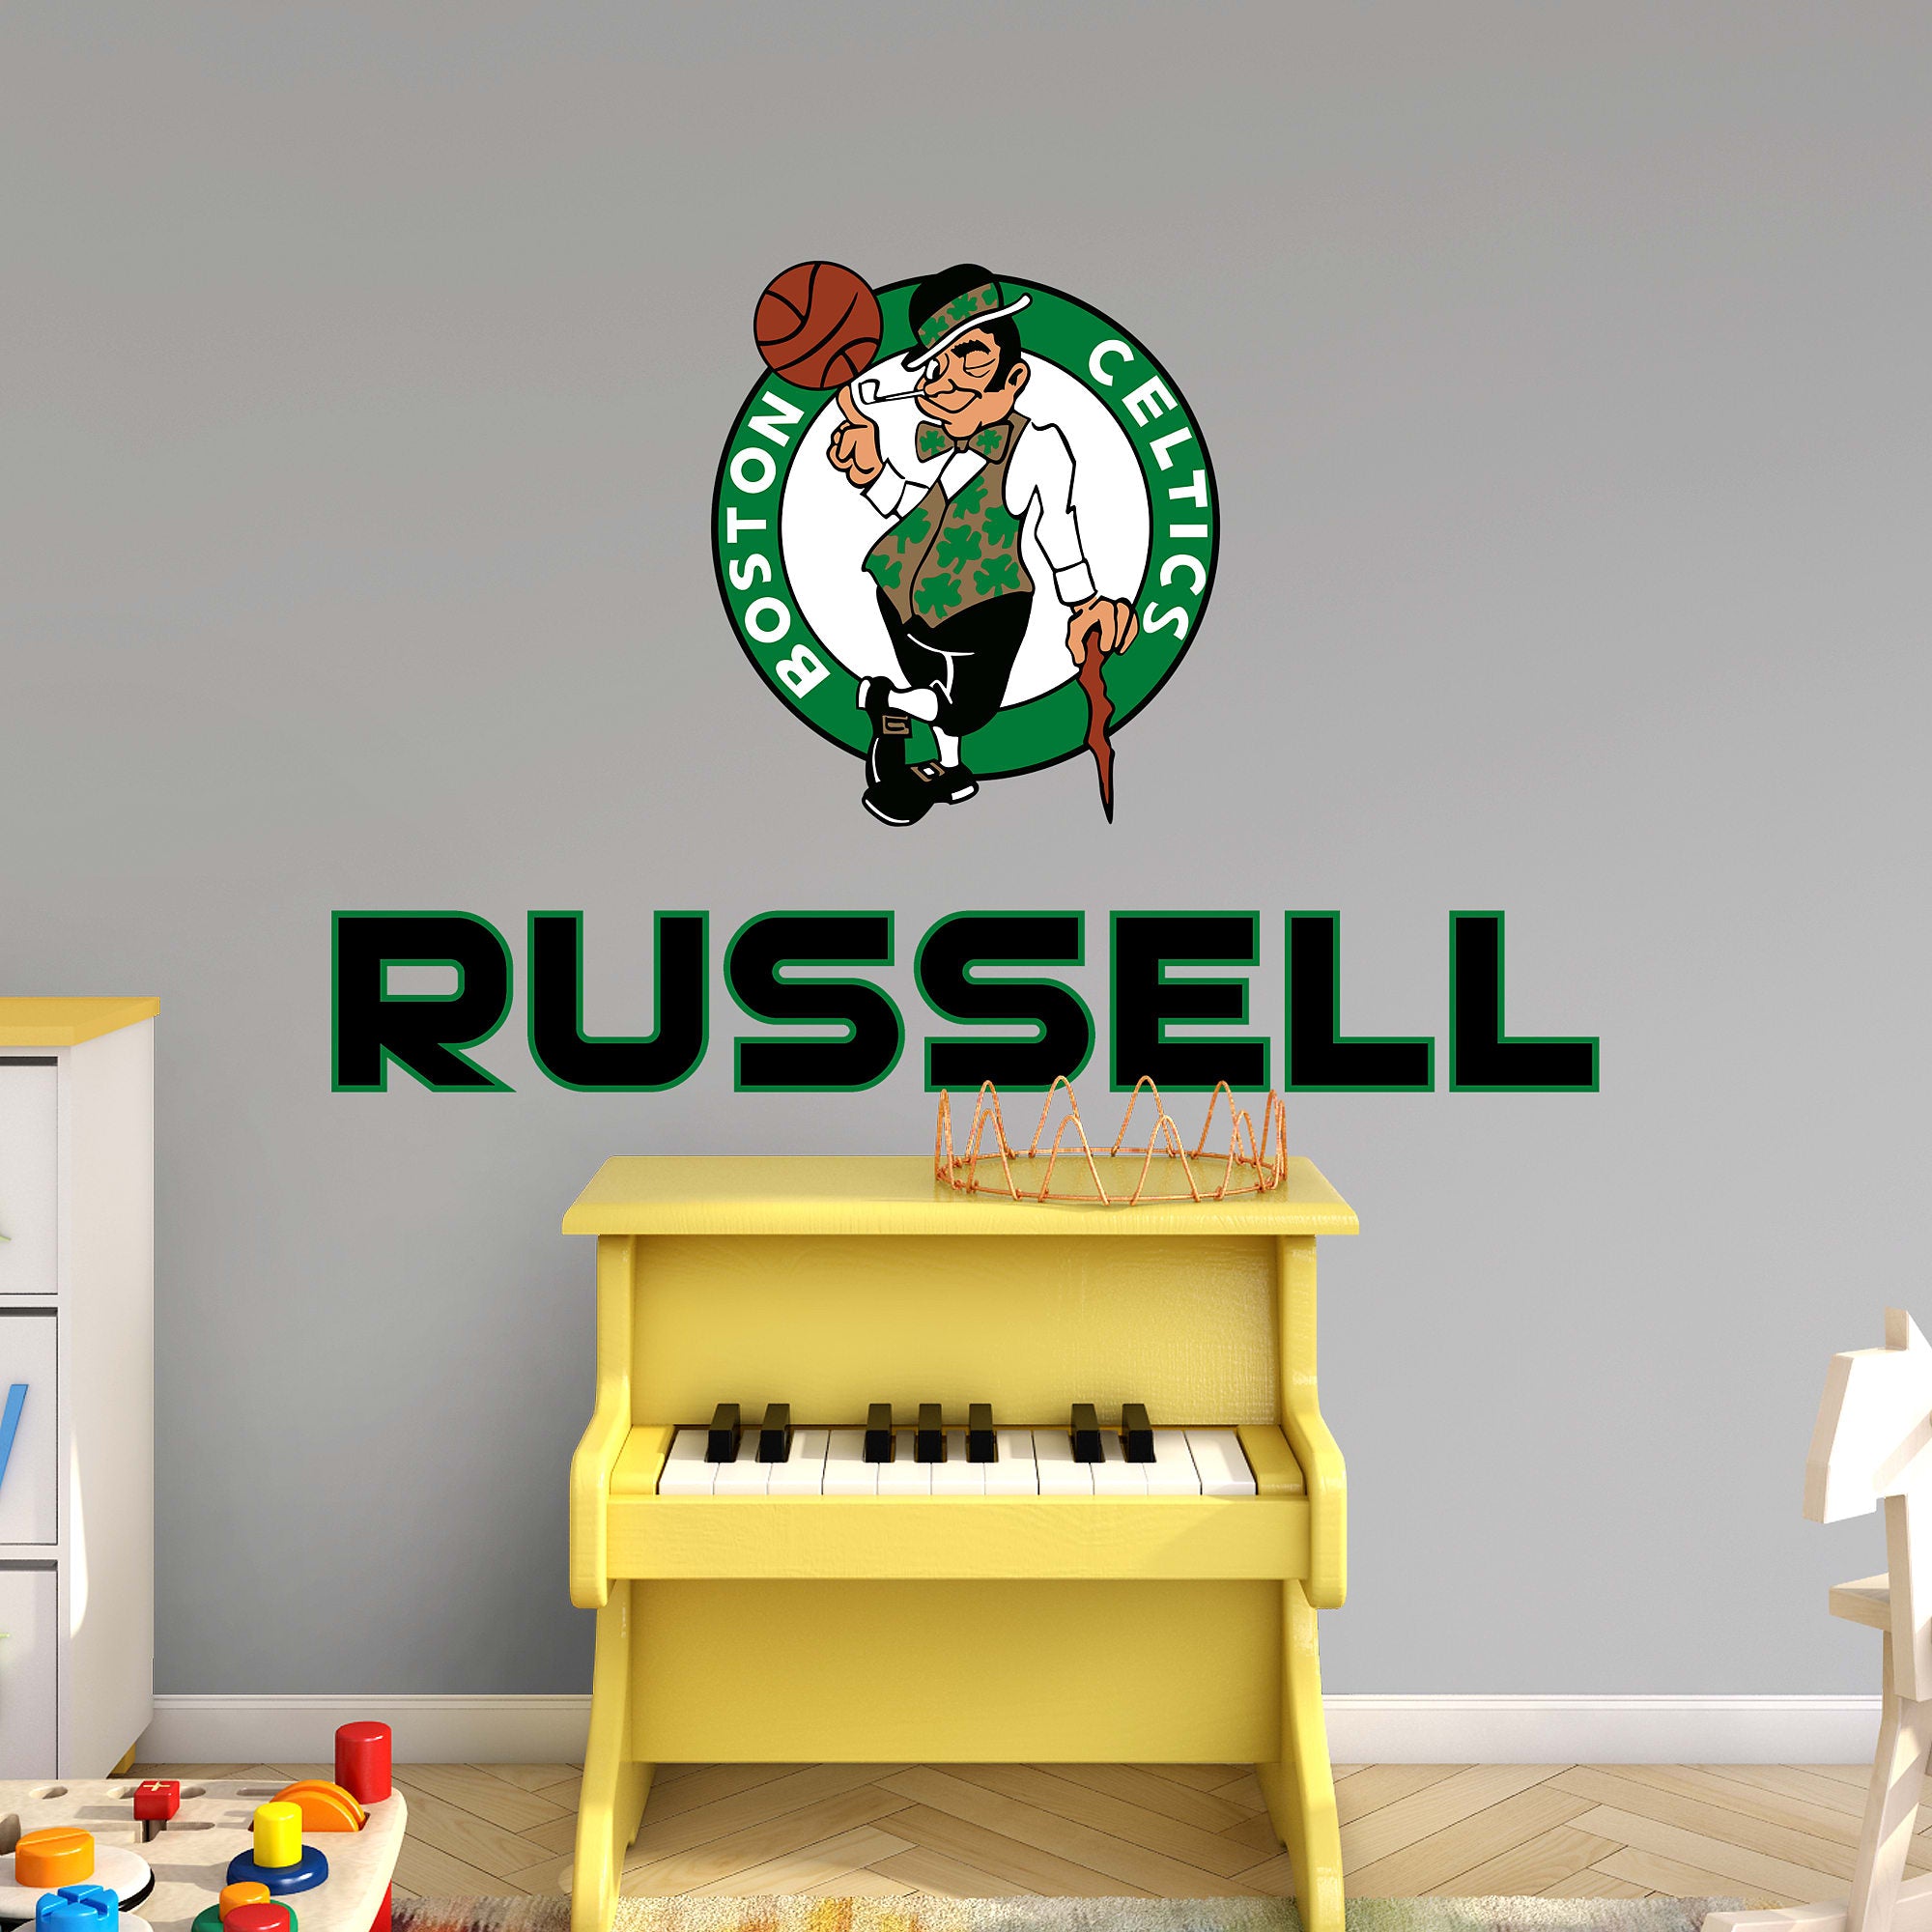 Boston Celtics: Stacked Personalized Name - Officially Licensed NBA Transfer Decal in Black (52"W x 39.5"H) by Fathead | Vinyl